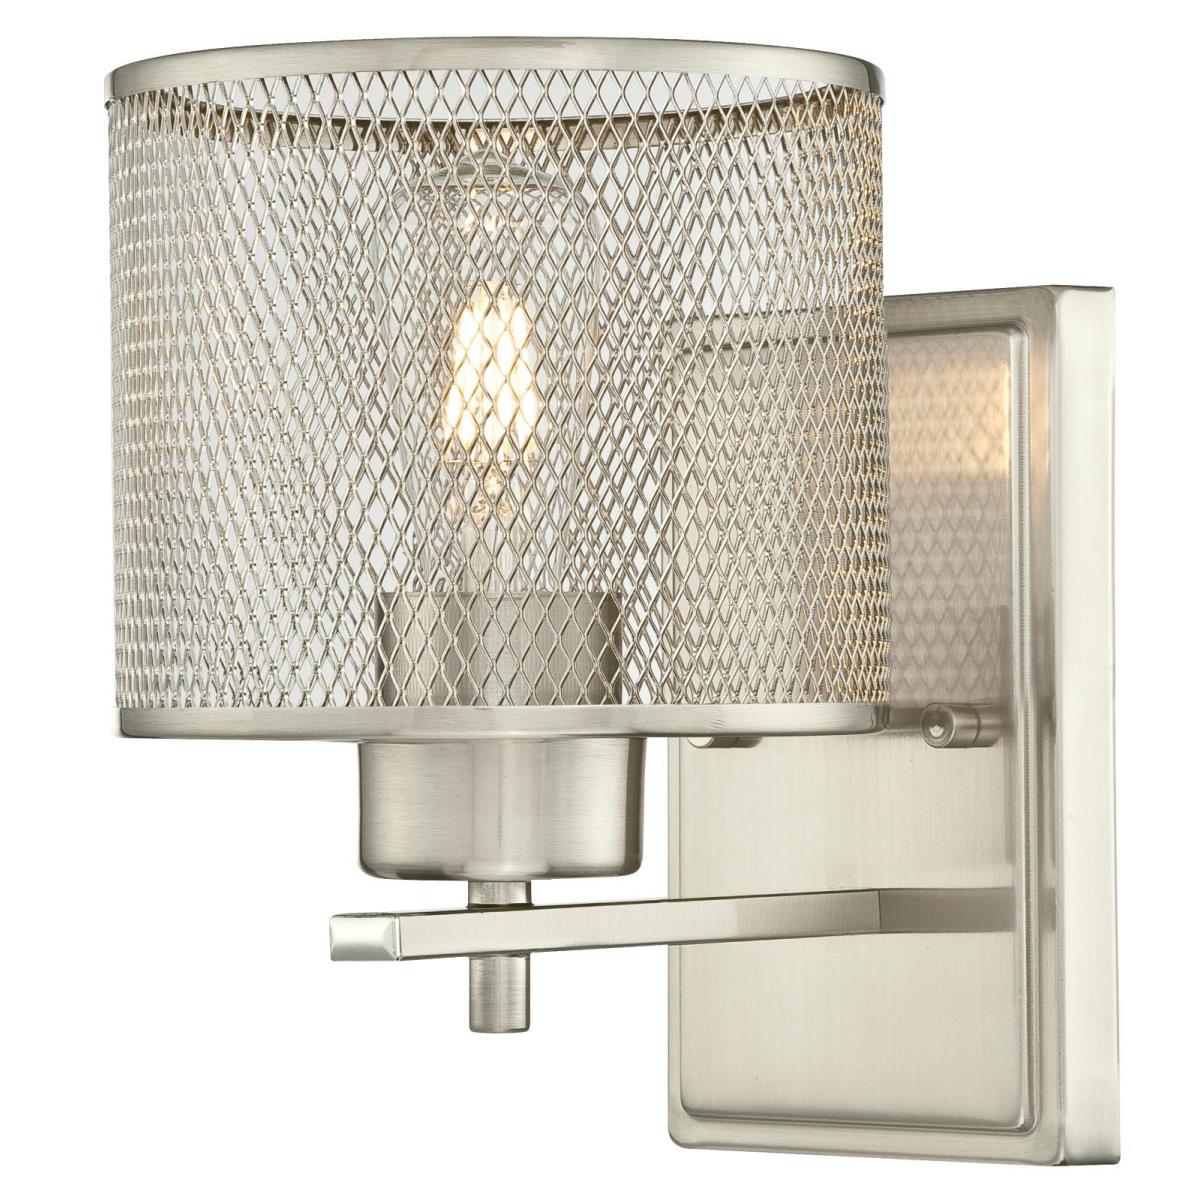 1 Light Wall Brushed Nickel Finish with Mesh Shade